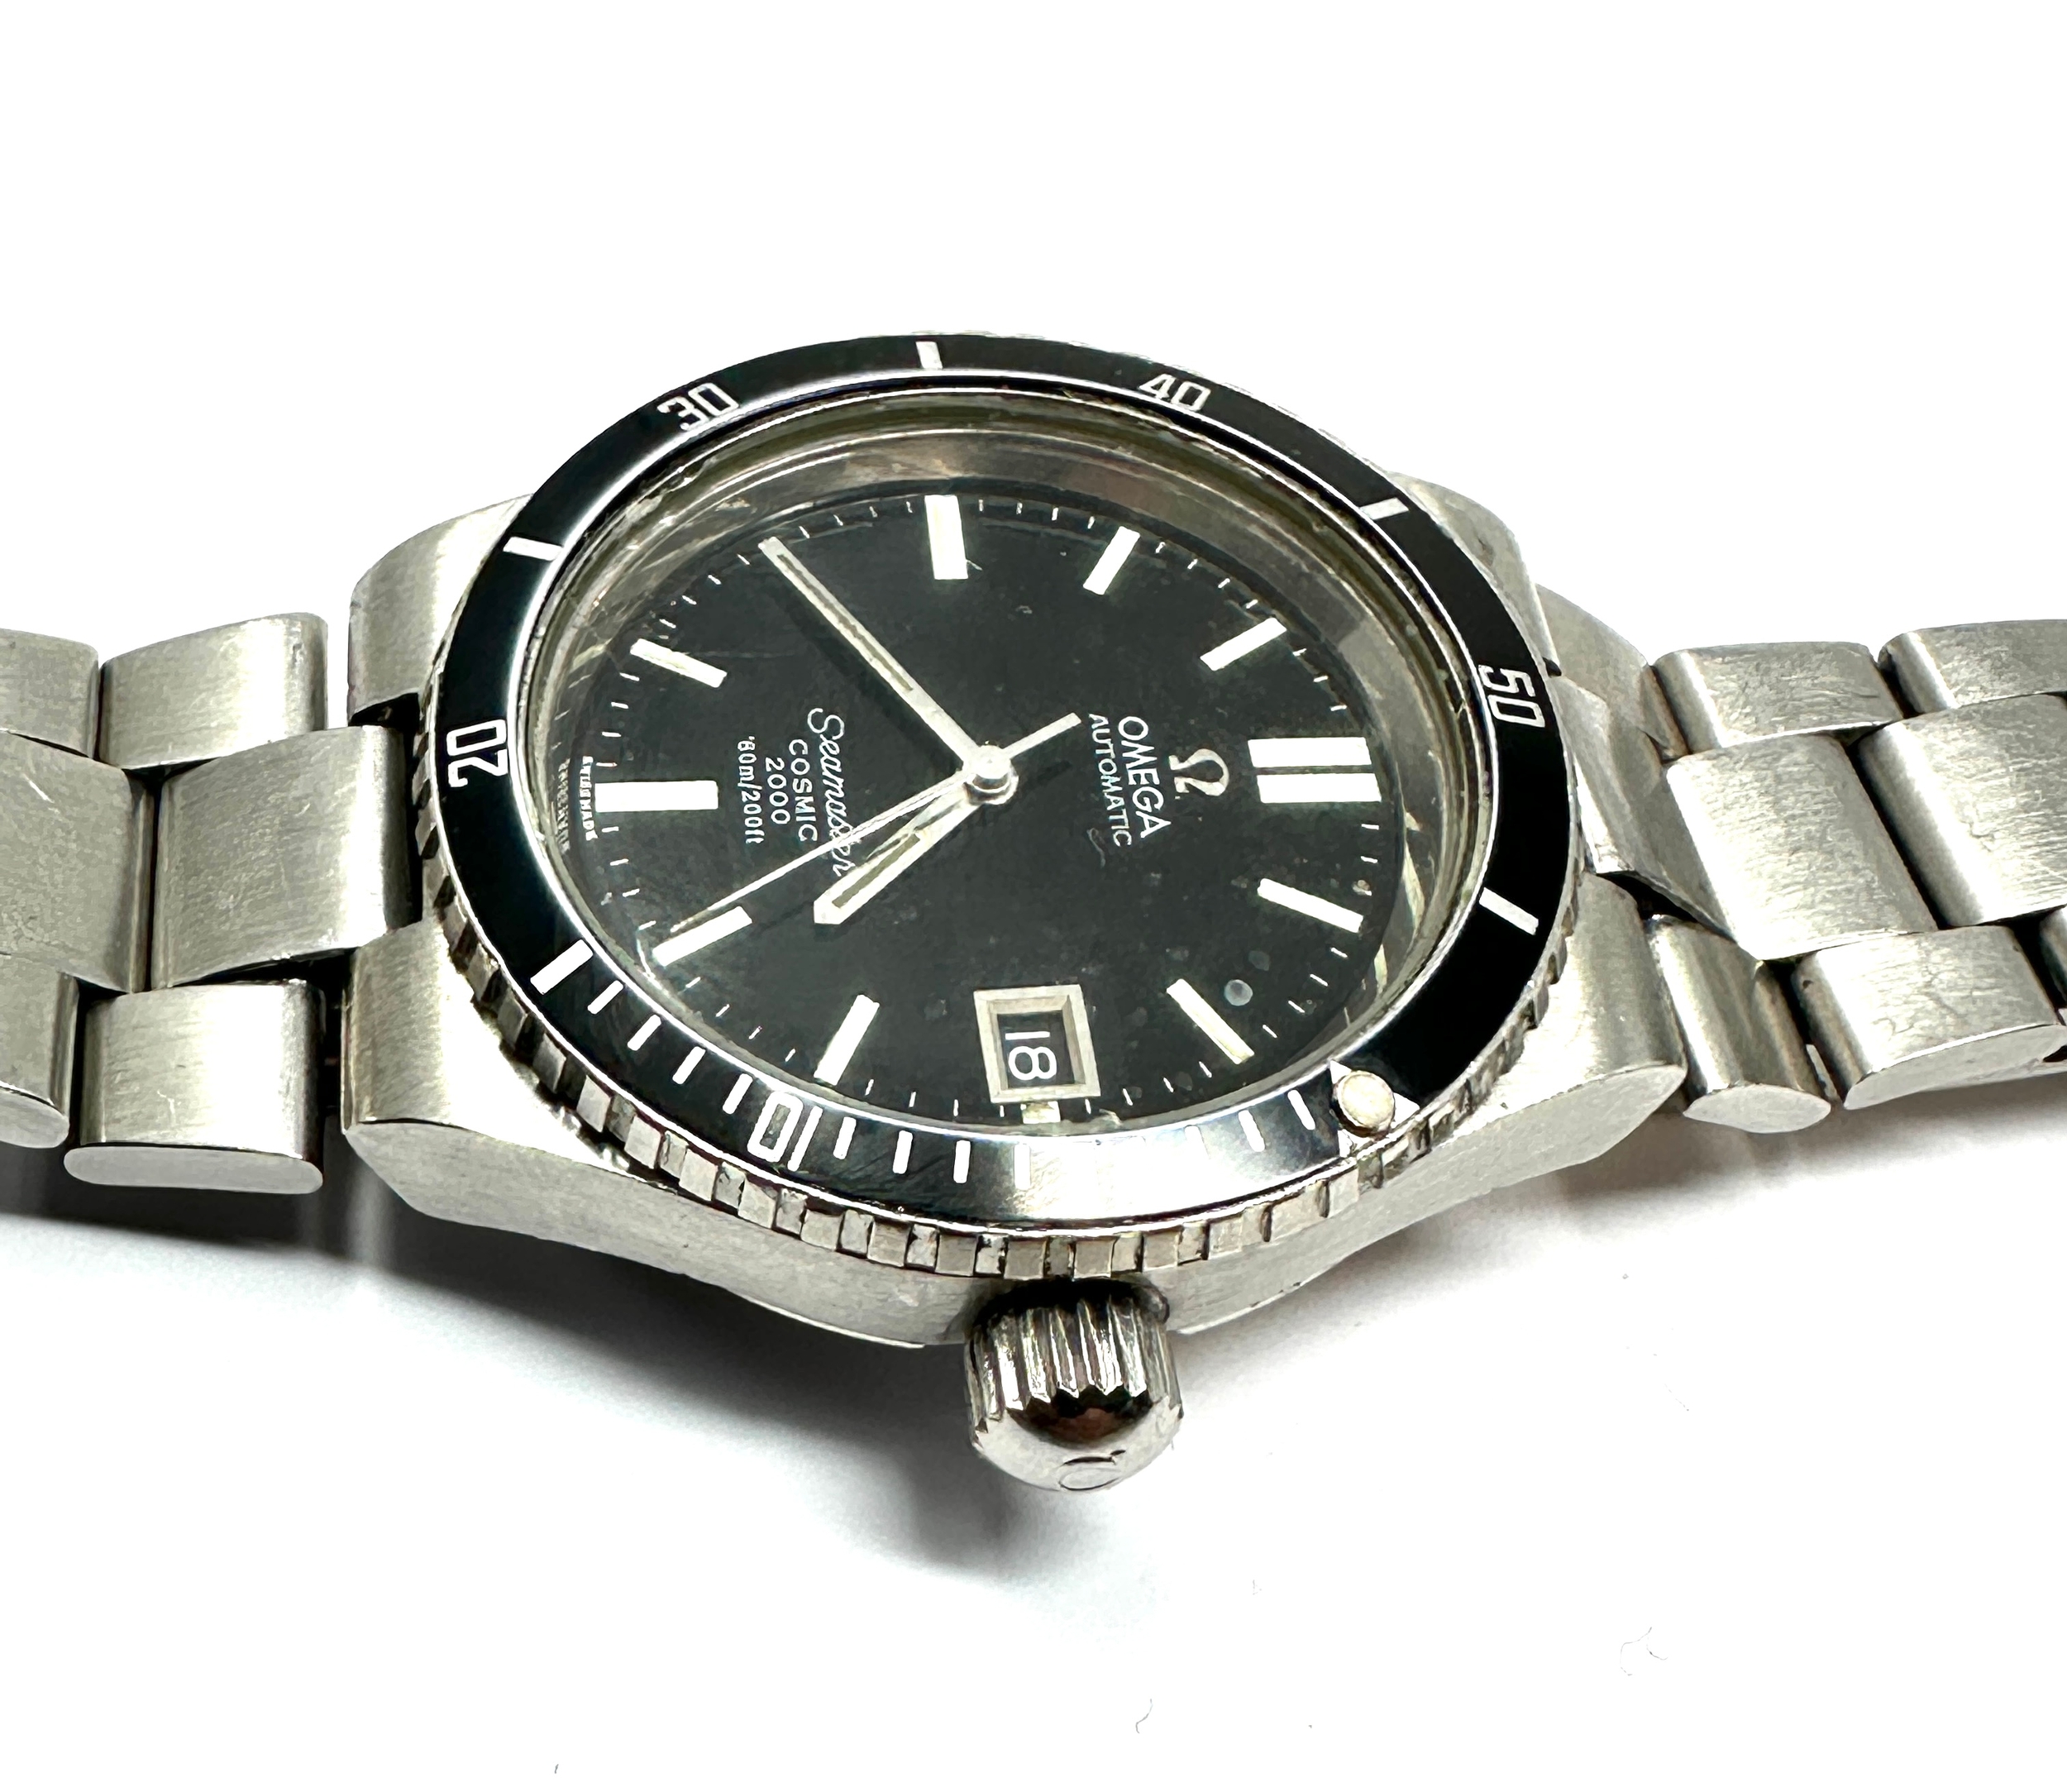 Vintage Omega Automatic Seamaster Cosmic 2000 Diver Men's Watch the watch is ticking name engraved - Image 3 of 6